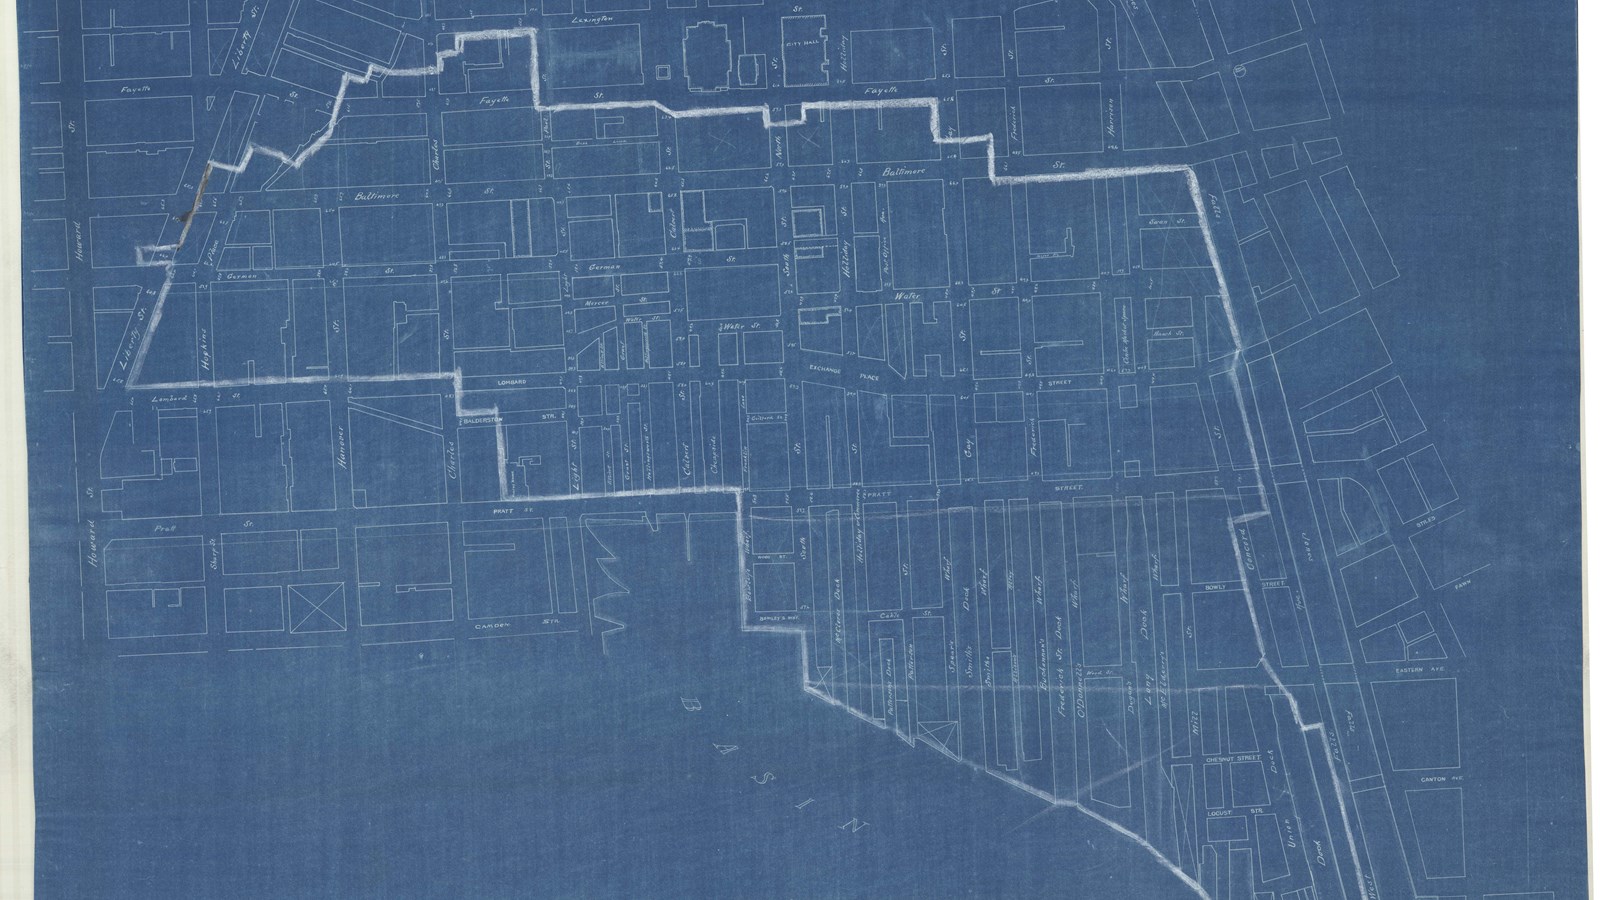 Blueprint plan of straight line roads of city of Baltimore